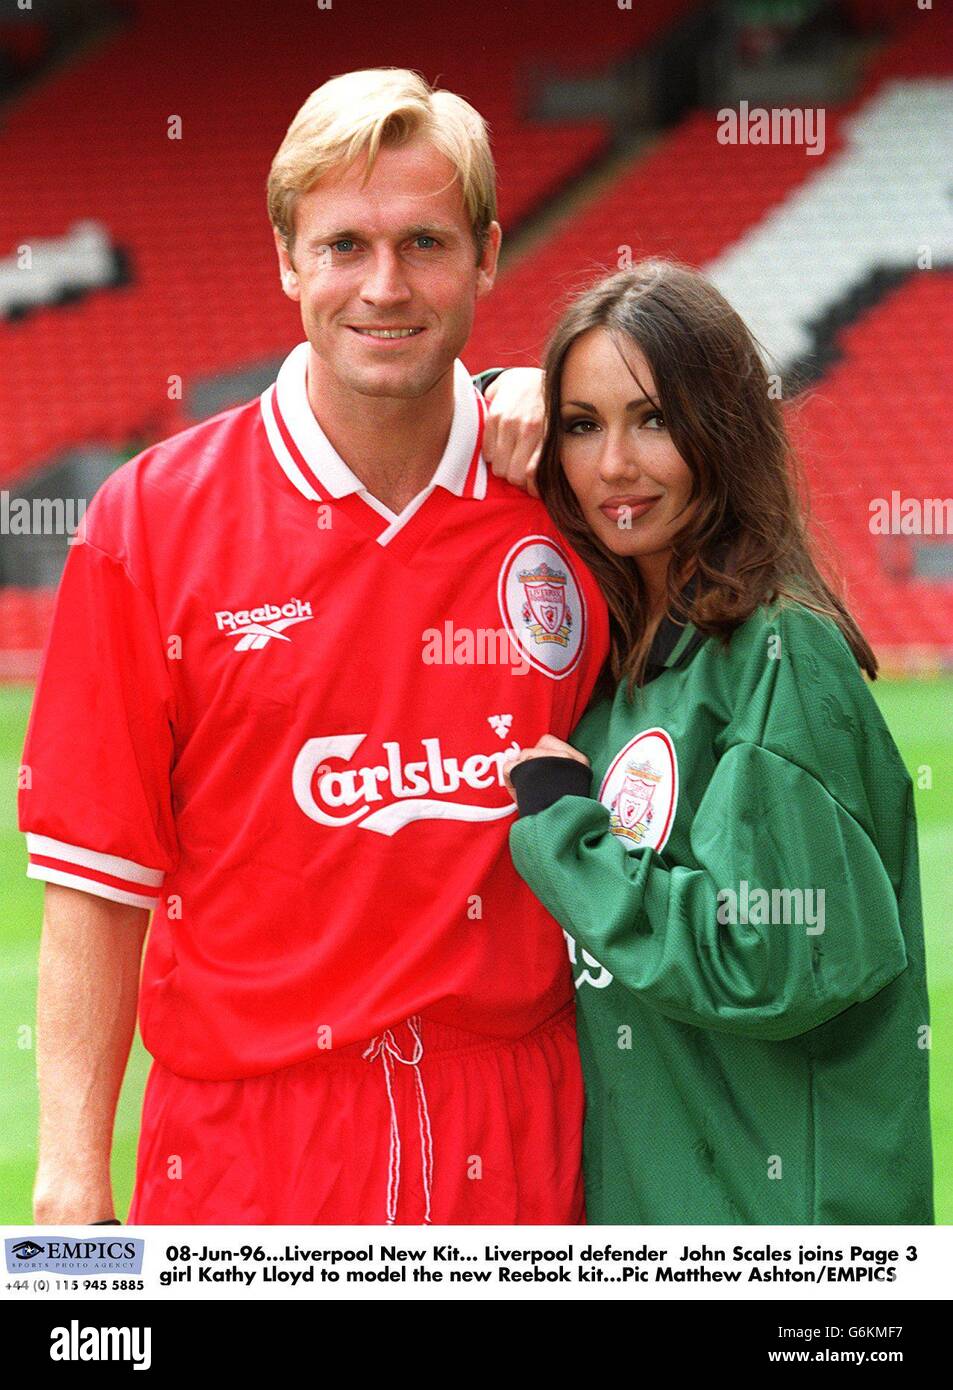 08-Jun-96. Liverpool New Kit. Liverpool defender John Scales joins Page 3 girl Kathy Lloyd to model the new Reebok kit Stock Photo